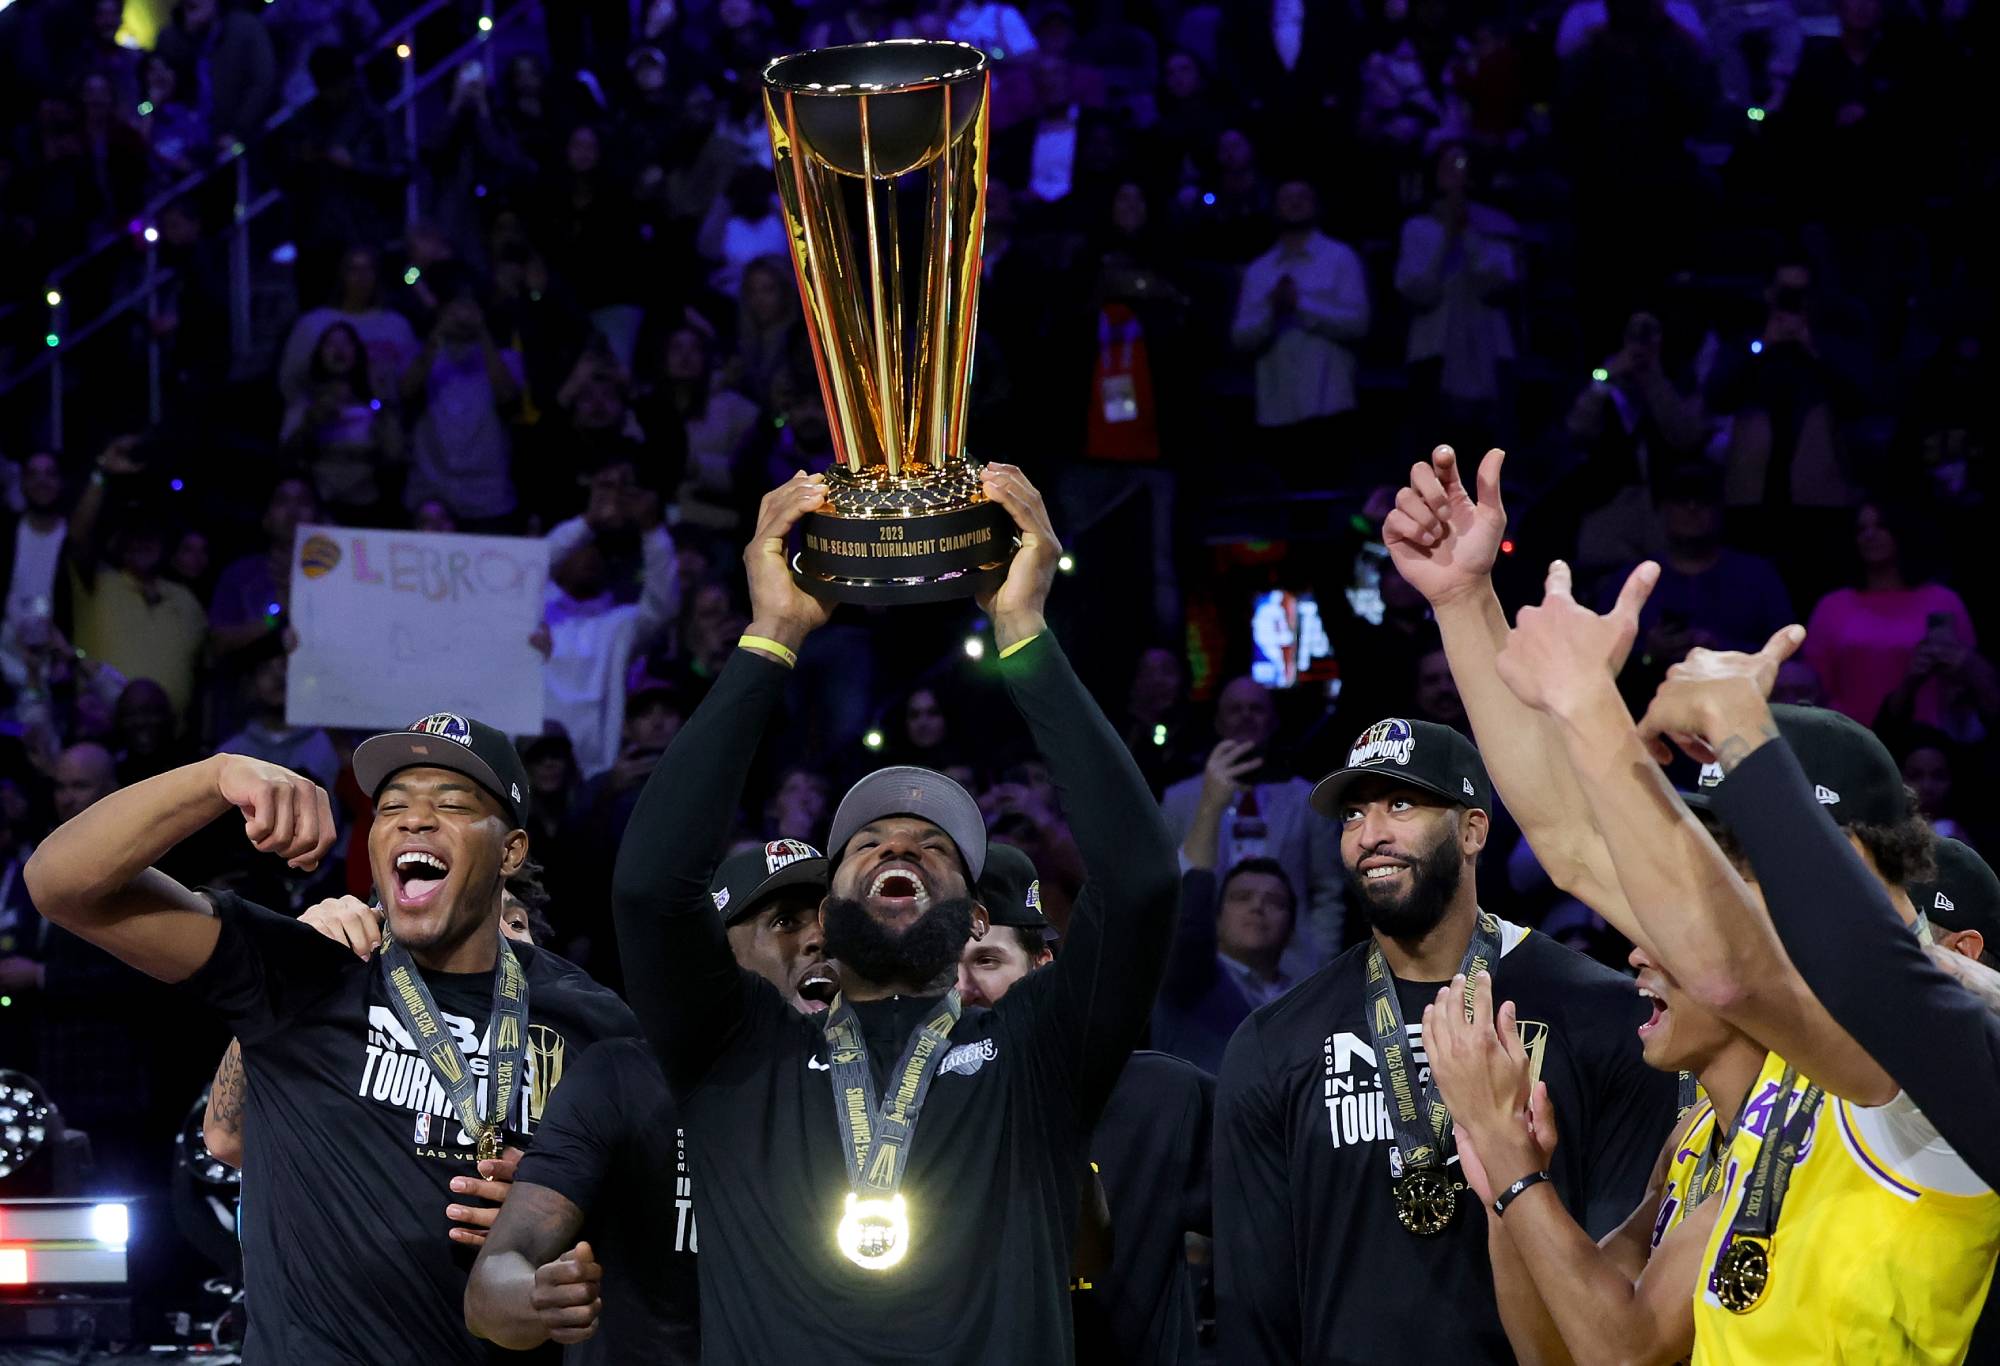 LAS VEGAS, NEVADA - DECEMBER 09: LeBron James #23 of the Los Angeles Lakers hoists the trophy with his teammates after winning the championship game of the inaugural NBA In-Season Tournament at T-Mobile Arena on December 09, 2023 in Las Vegas, Nevada. NOTE TO USER: User expressly acknowledges and agrees that, by downloading and or using this photograph, User is consenting to the terms and conditions of the Getty Images License Agreement. (Photo by Ethan Miller/Getty Images)